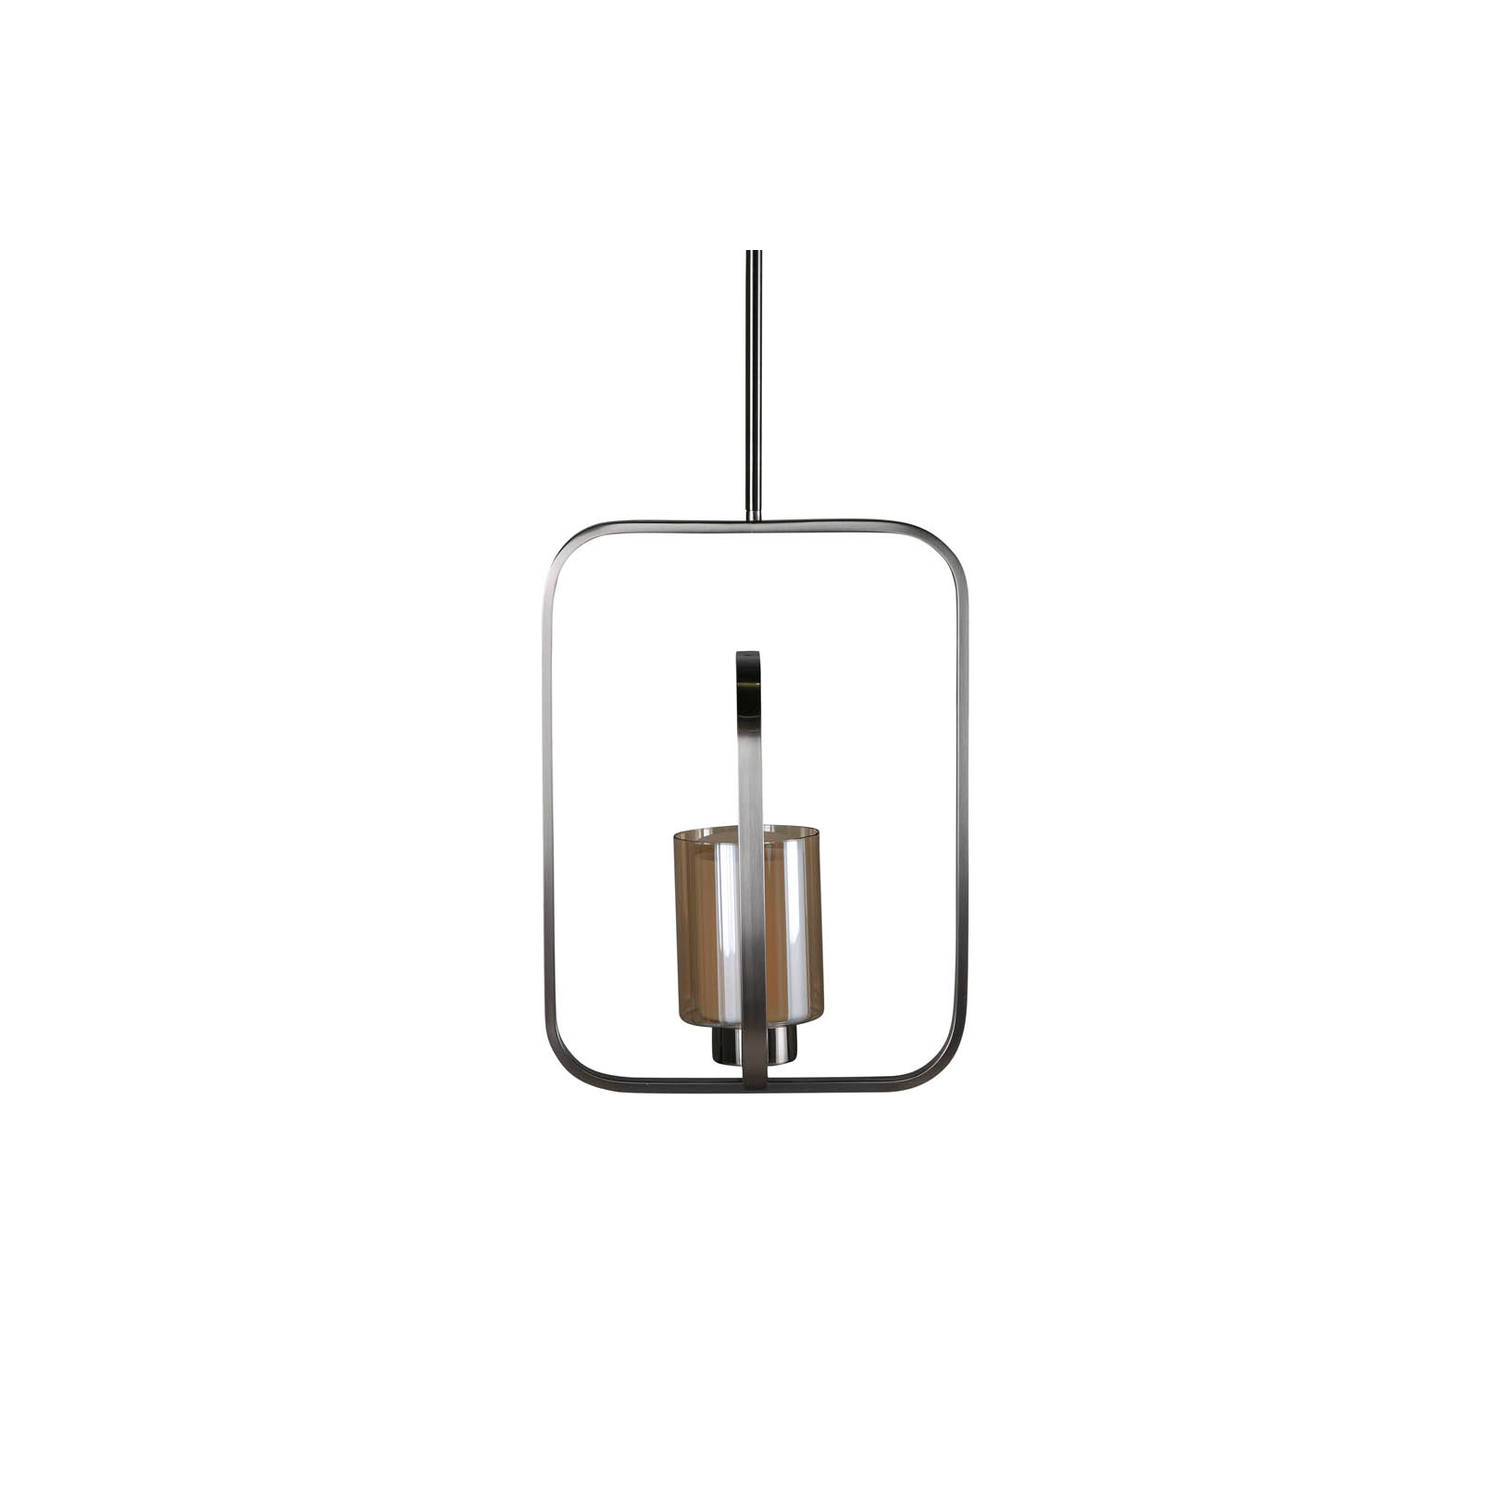 Hioshop Aludra verlichting hanglamp 34x12x46cm glas, staal